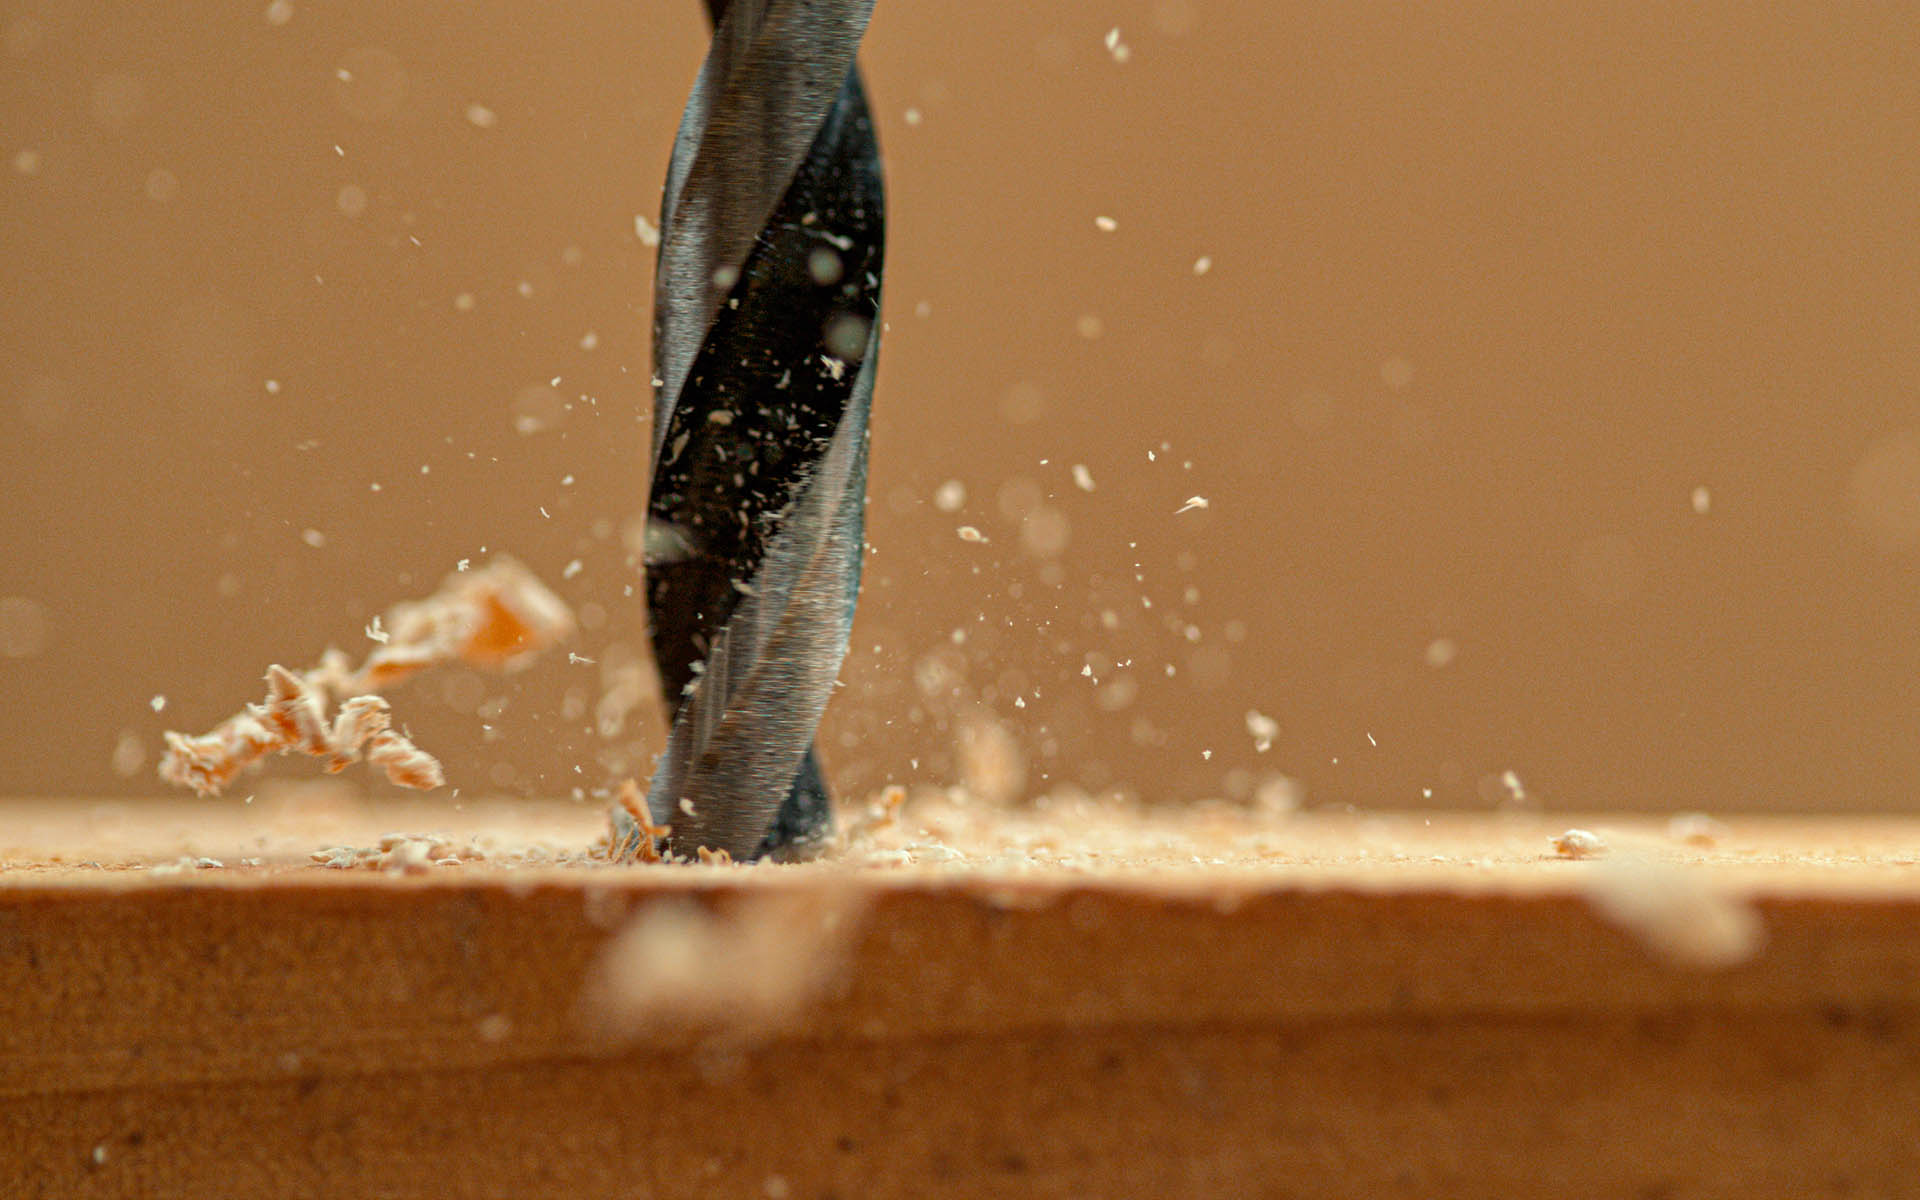 MACRO, DOF: Wood chippings fly off the plank sitting on a carpenter's workbench as handyman drills holes into the workpiece. Sawdust flies off a spinning drill boring a hole into a wooden board.